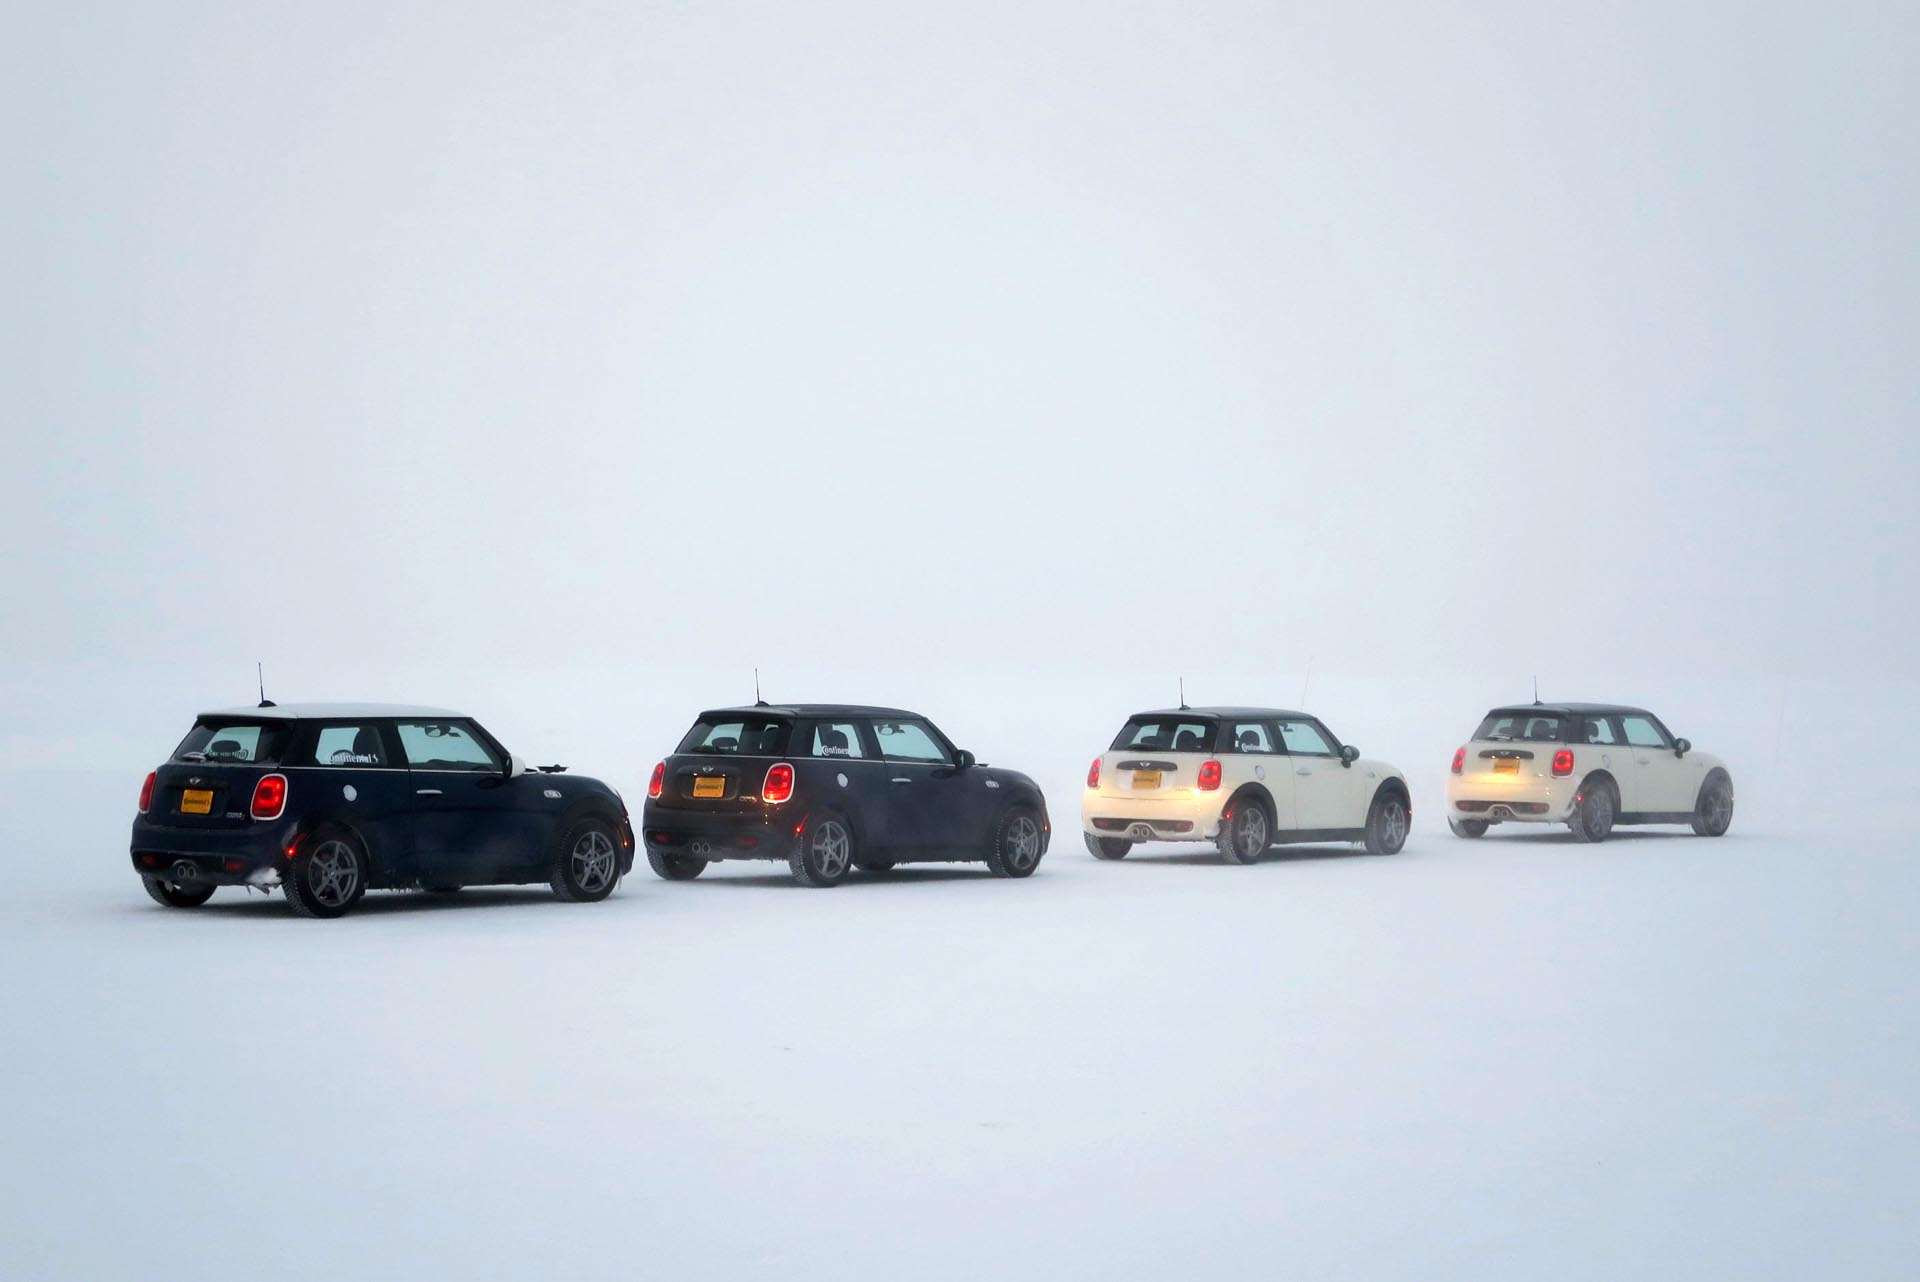 Turns out it’s not always sunny. We could hardly see these 2015 Mini Cooper S’s at nearby Yellowstone Airport, closed for the season and repurposed as testing facility for the automotive sector.